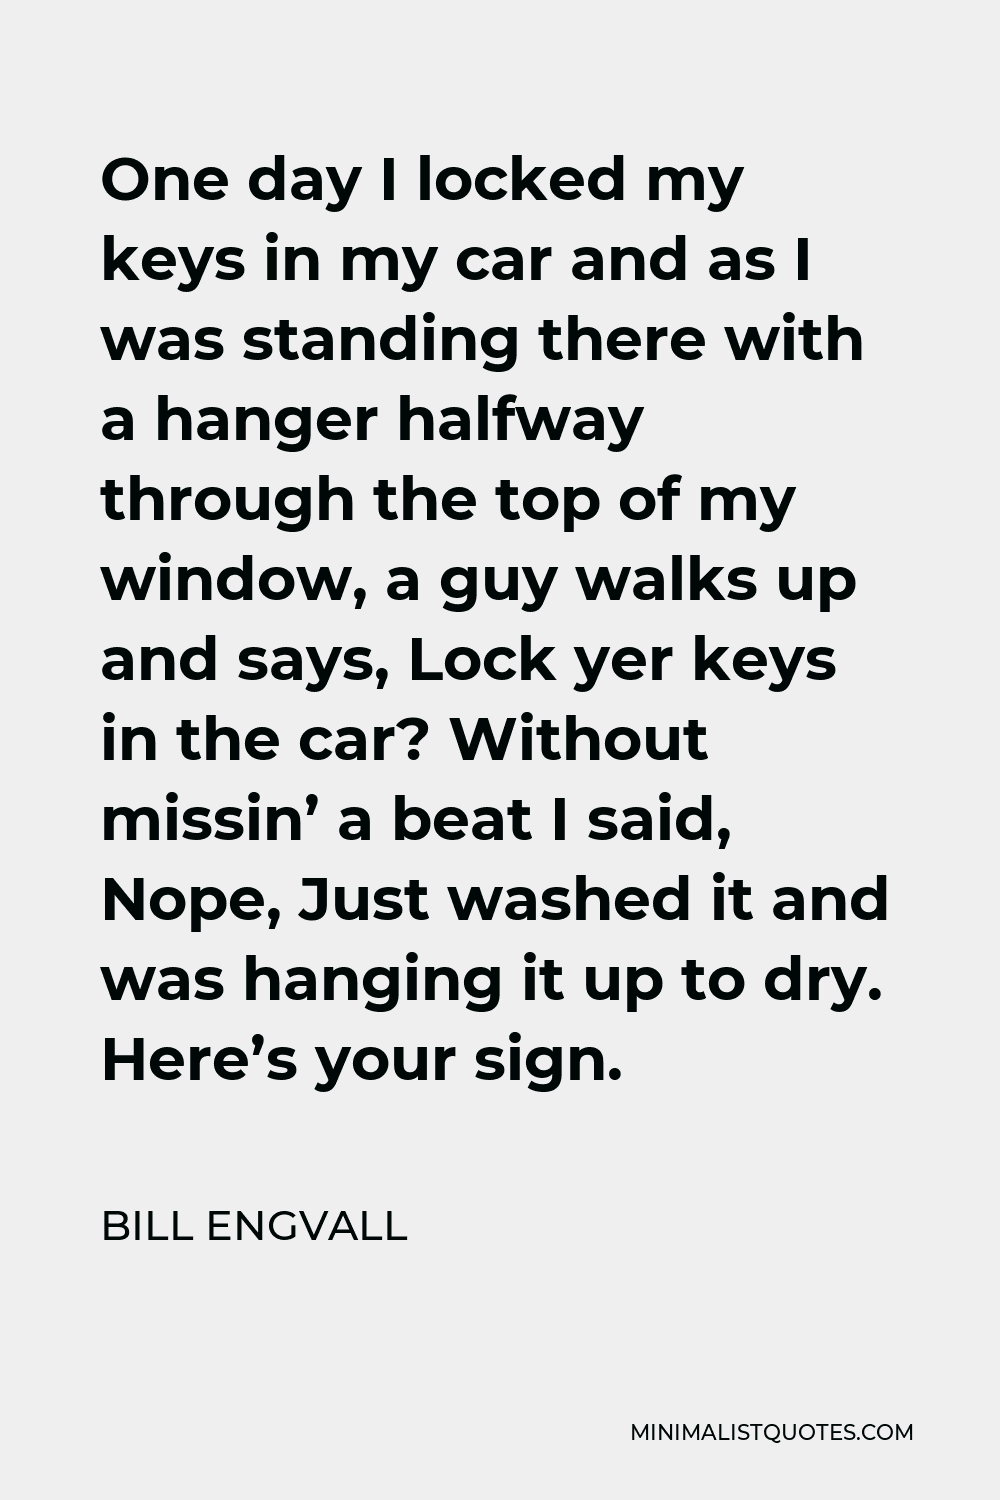 Bill Engvall Quote - One day I locked my keys in my car and as I was standing there with a hanger halfway through the top of my window, a guy walks up and says, Lock yer keys in the car? Without missin’ a beat I said, Nope, Just washed it and was hanging it up to dry. Here’s your sign.